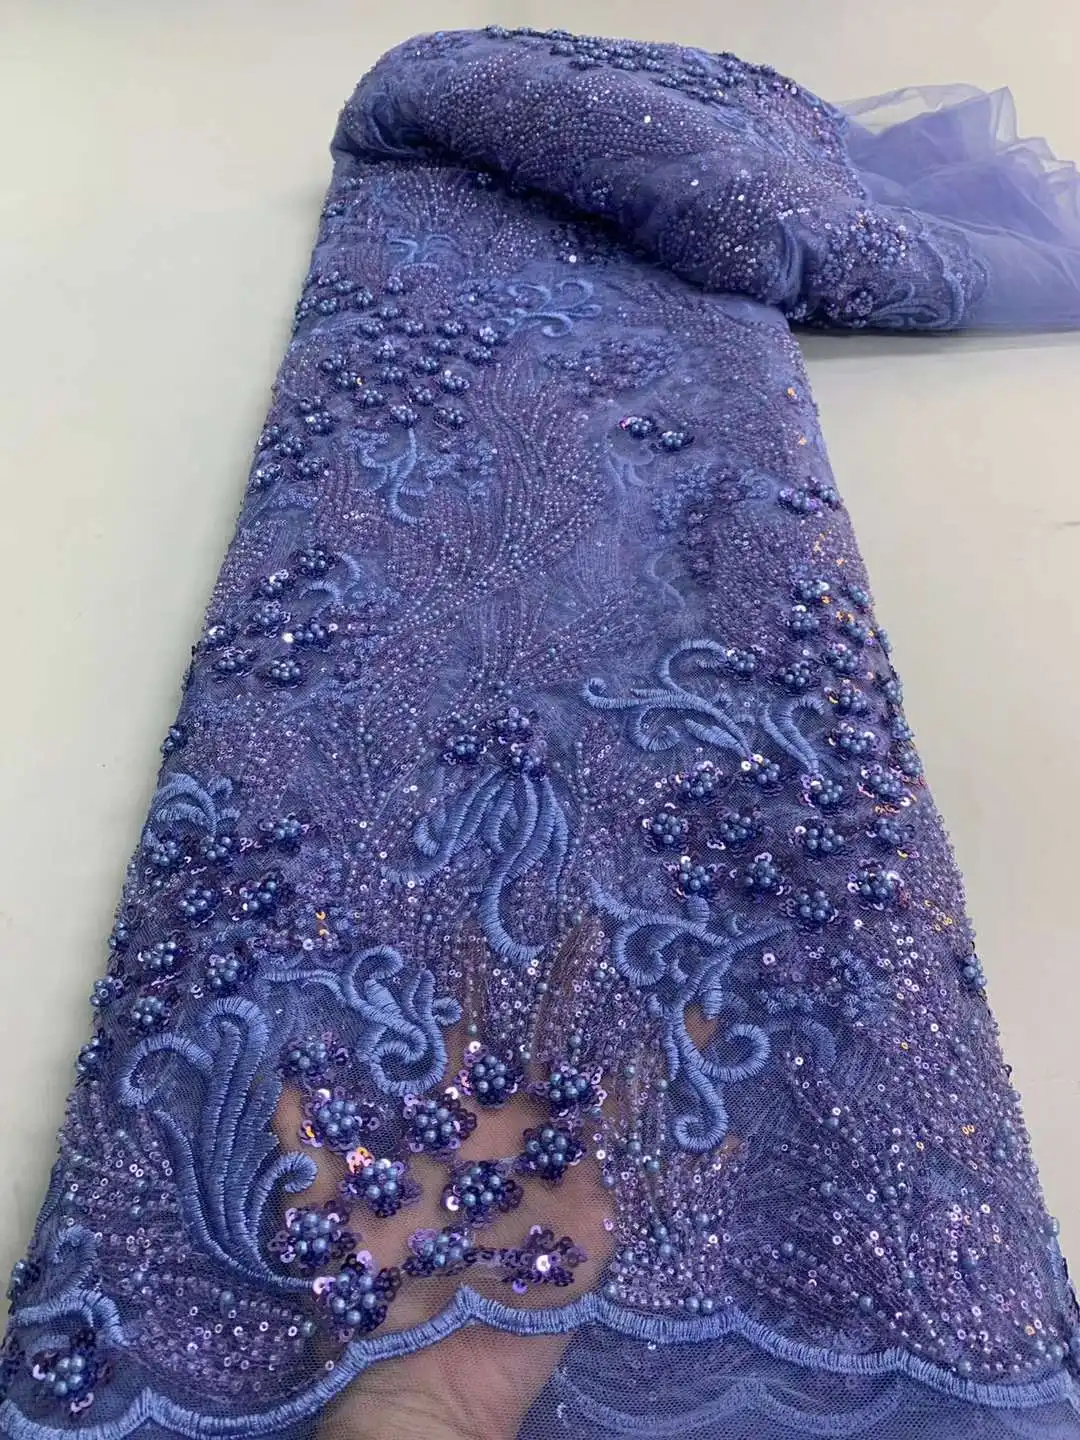 

Africa Groom Lace Fabric High Quality 2022 Sequins Net Nigerian Fabrics Materials For Beaded Lace Fabric 5 Yards Wedding Dress